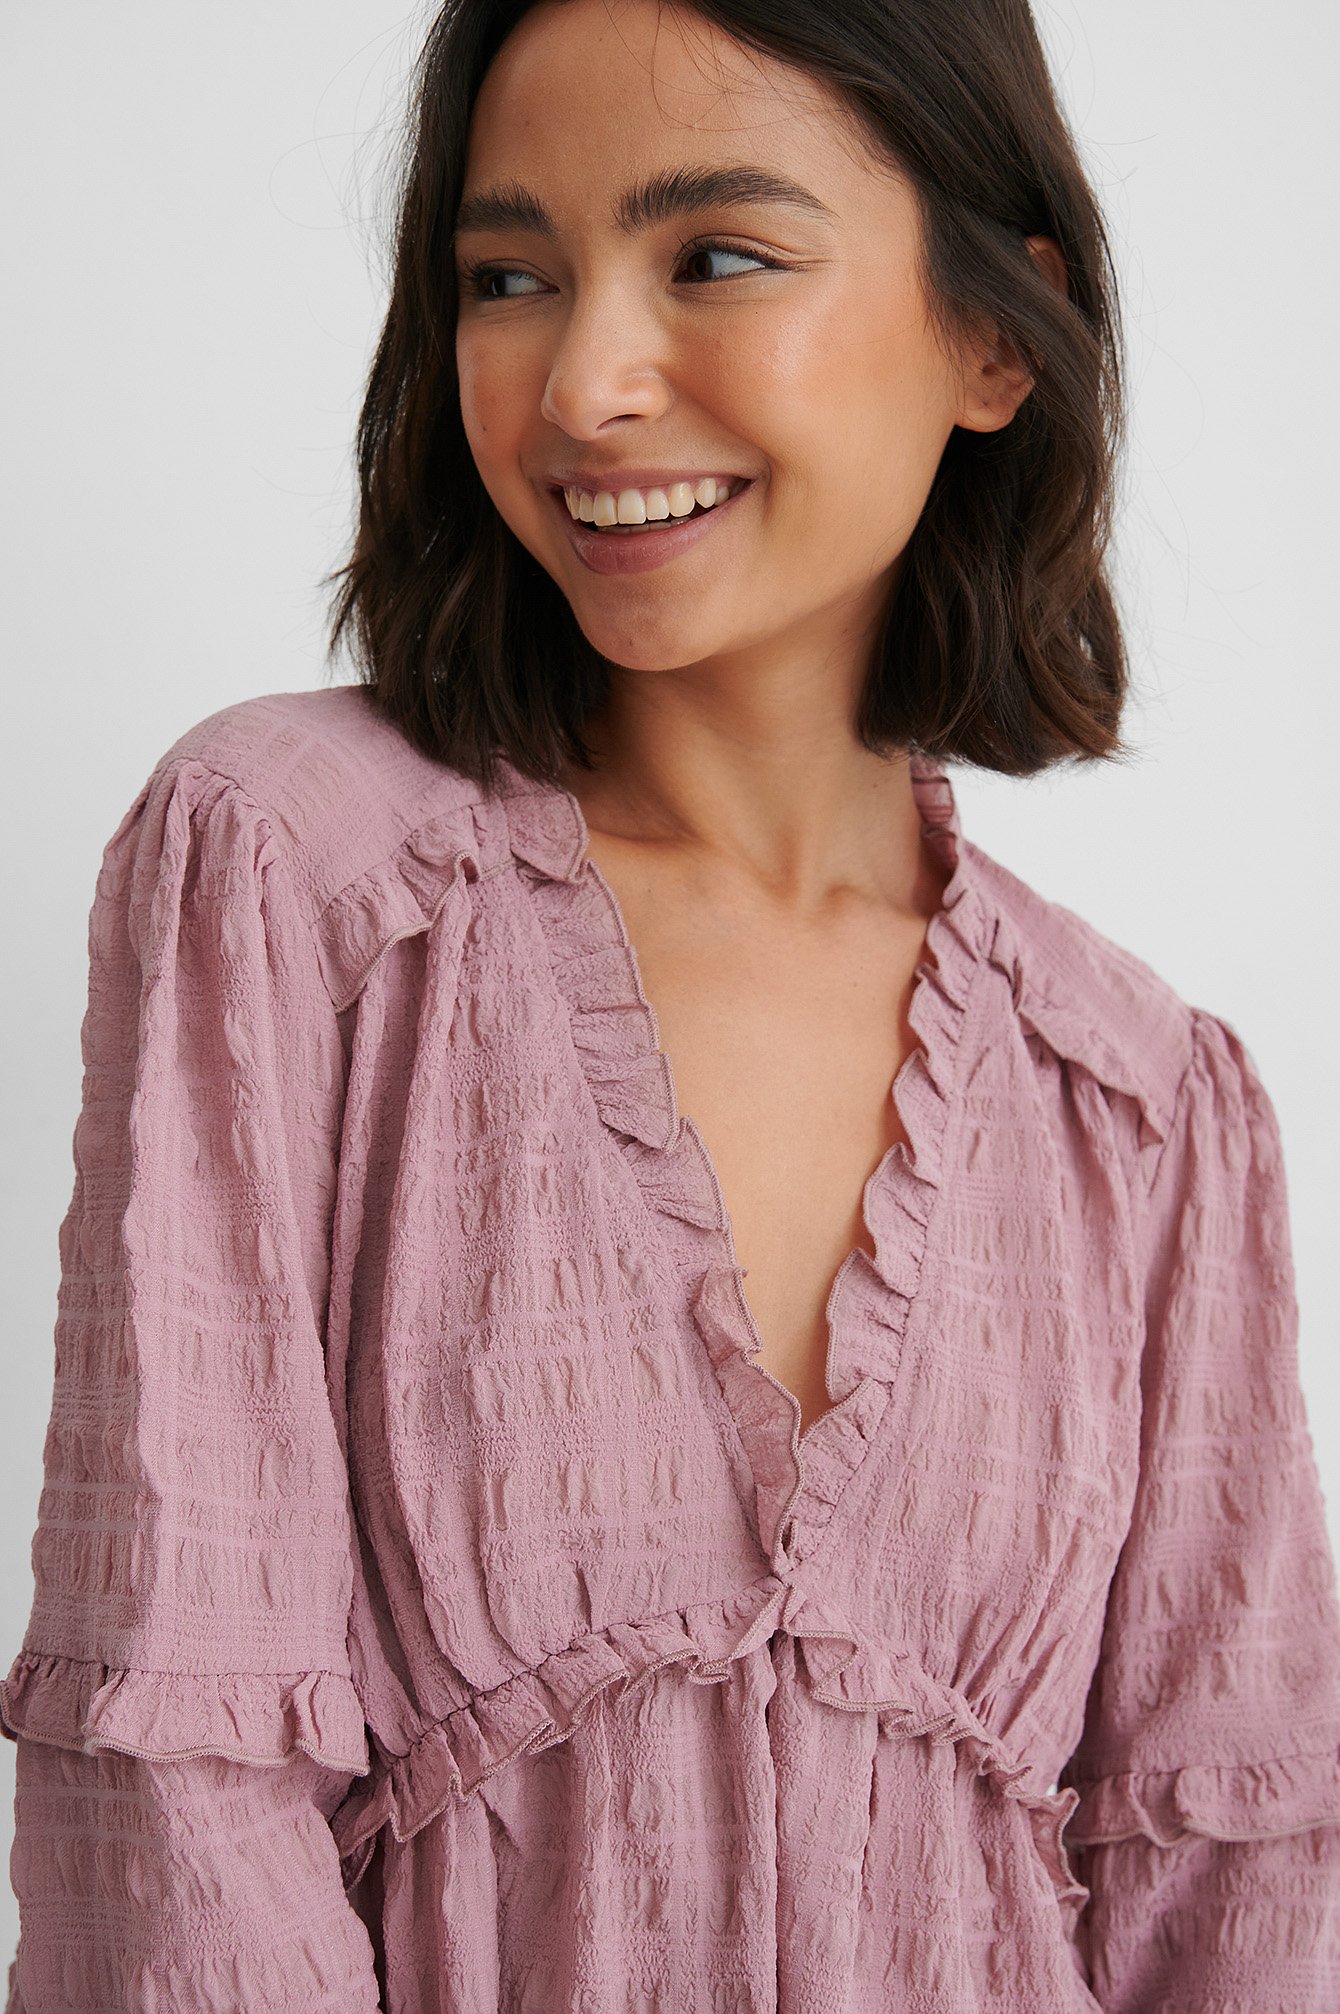 Dusty Dark Pink Structured Frill Blouse